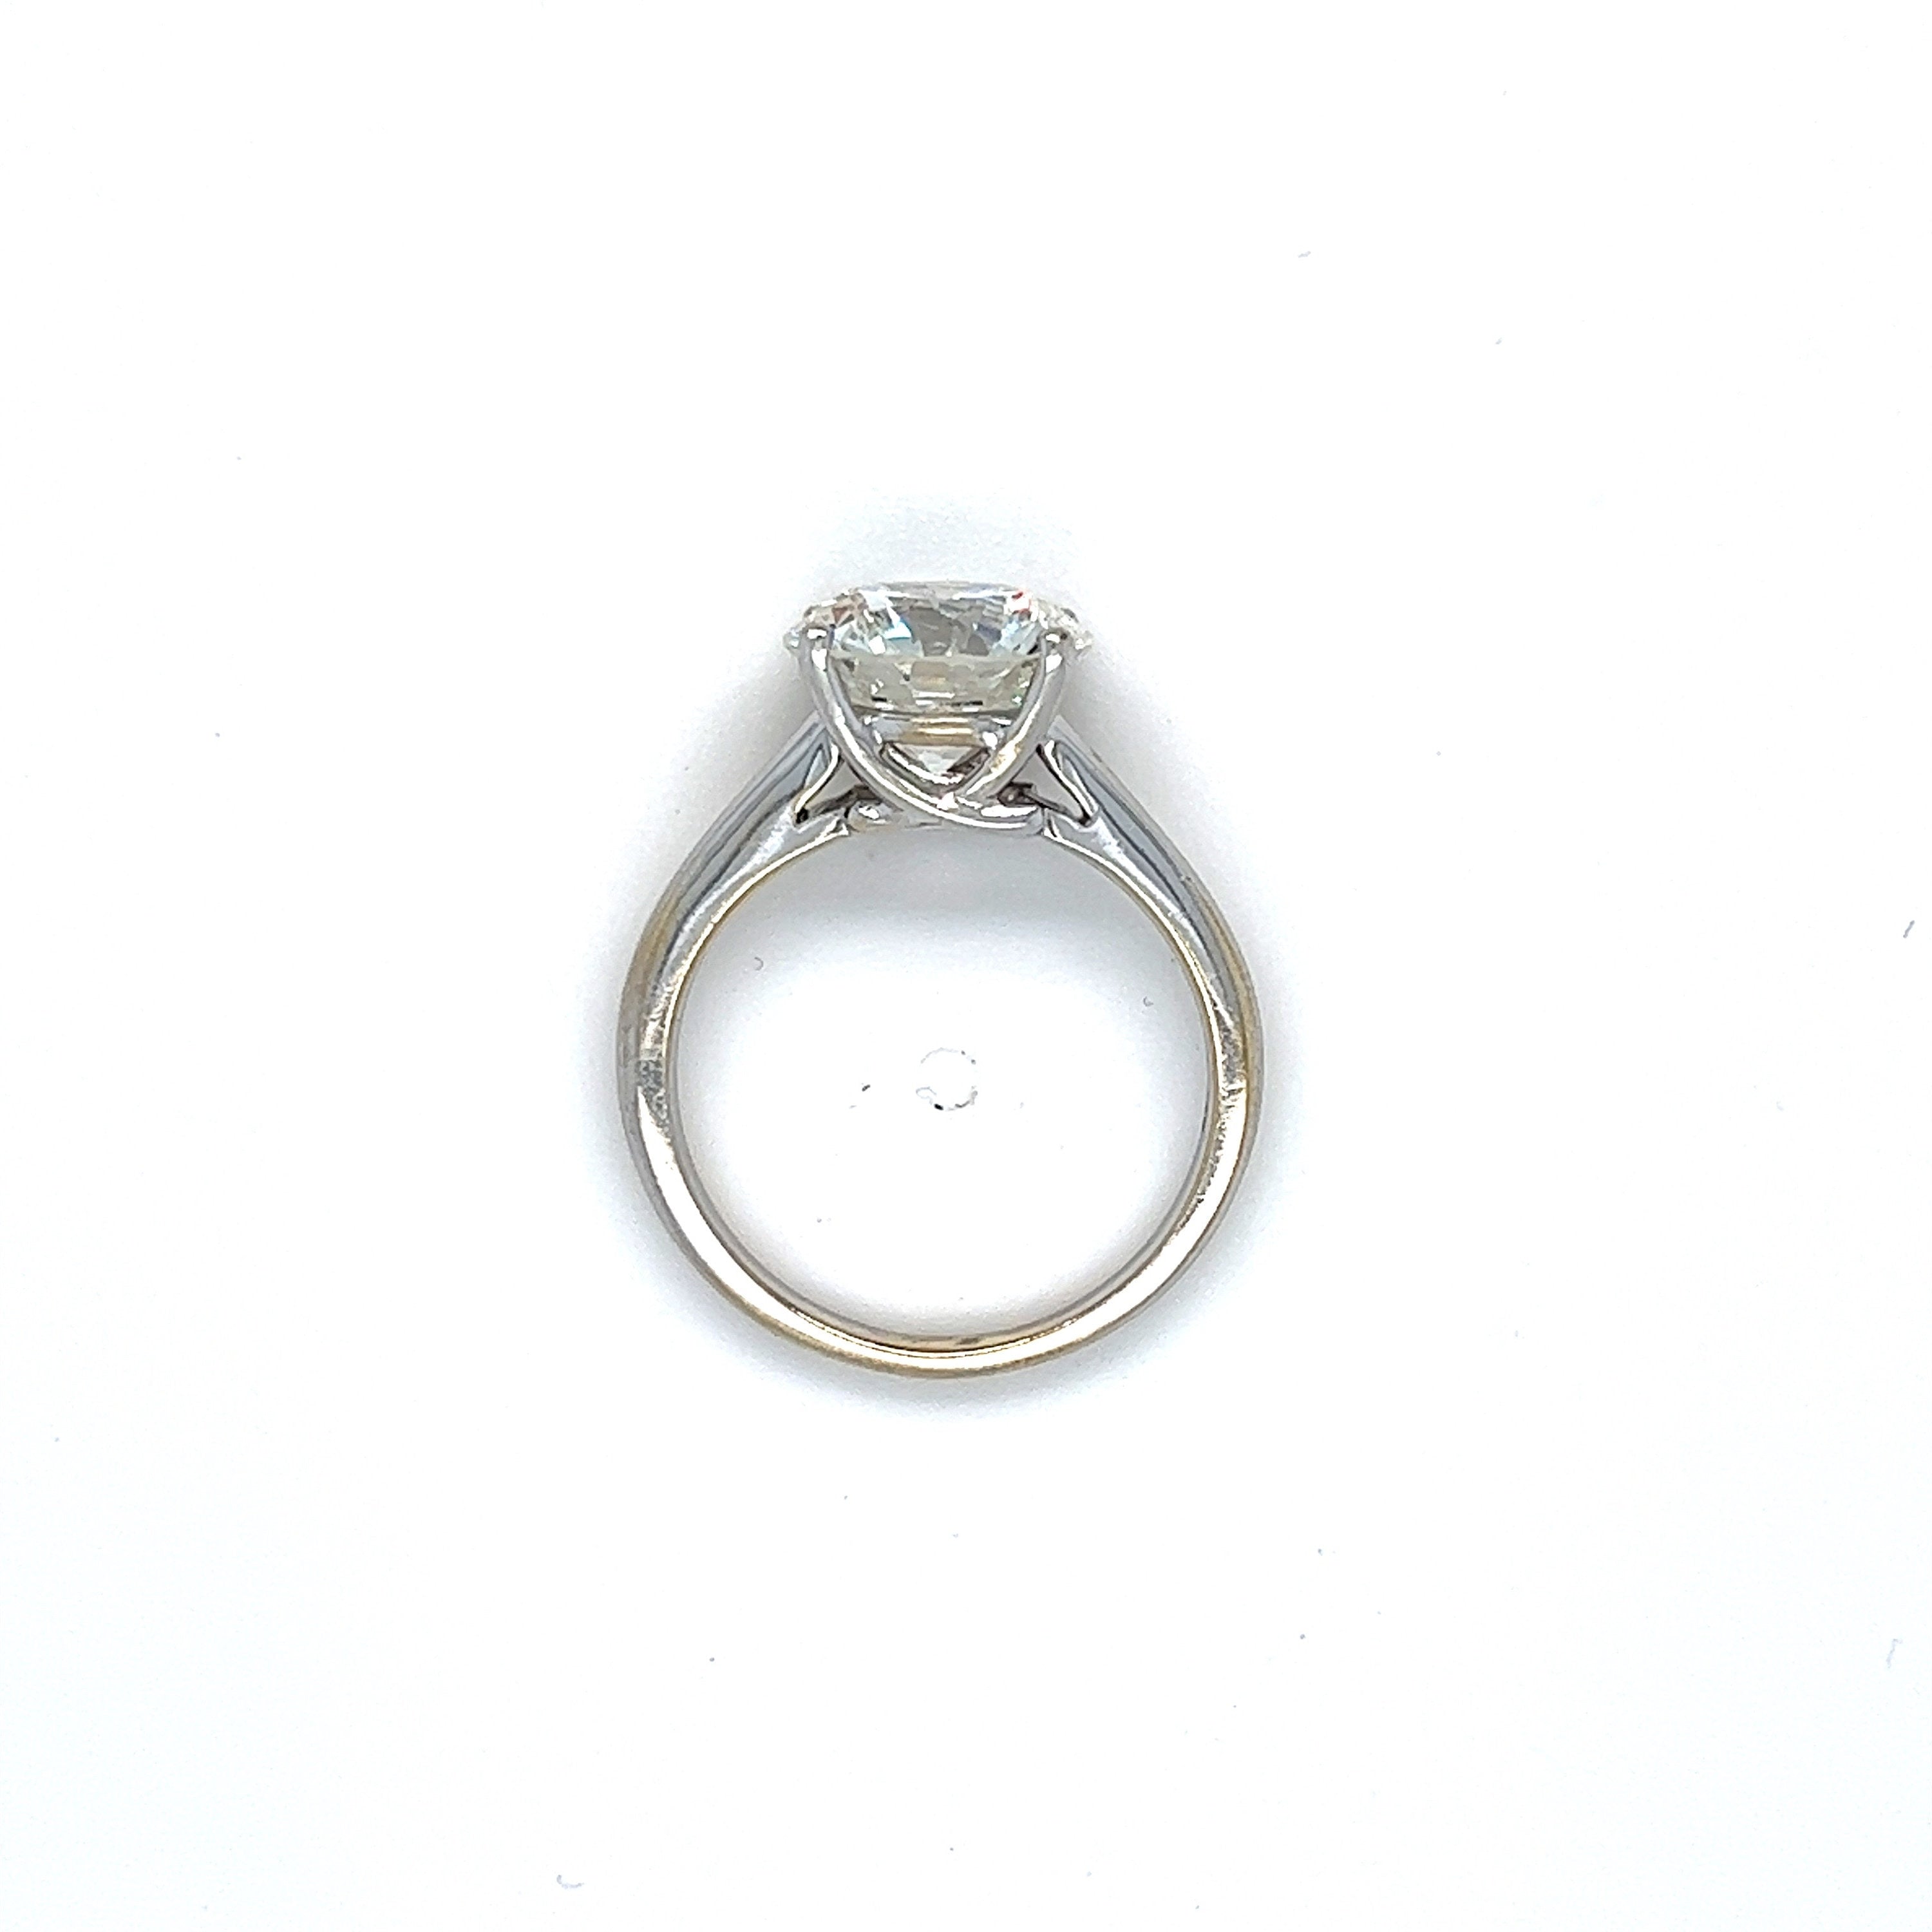 Stunning Large AGS Diamond Solitaire in 18K White Gold - 3.17CT - AGS 0 - Ideal CUT